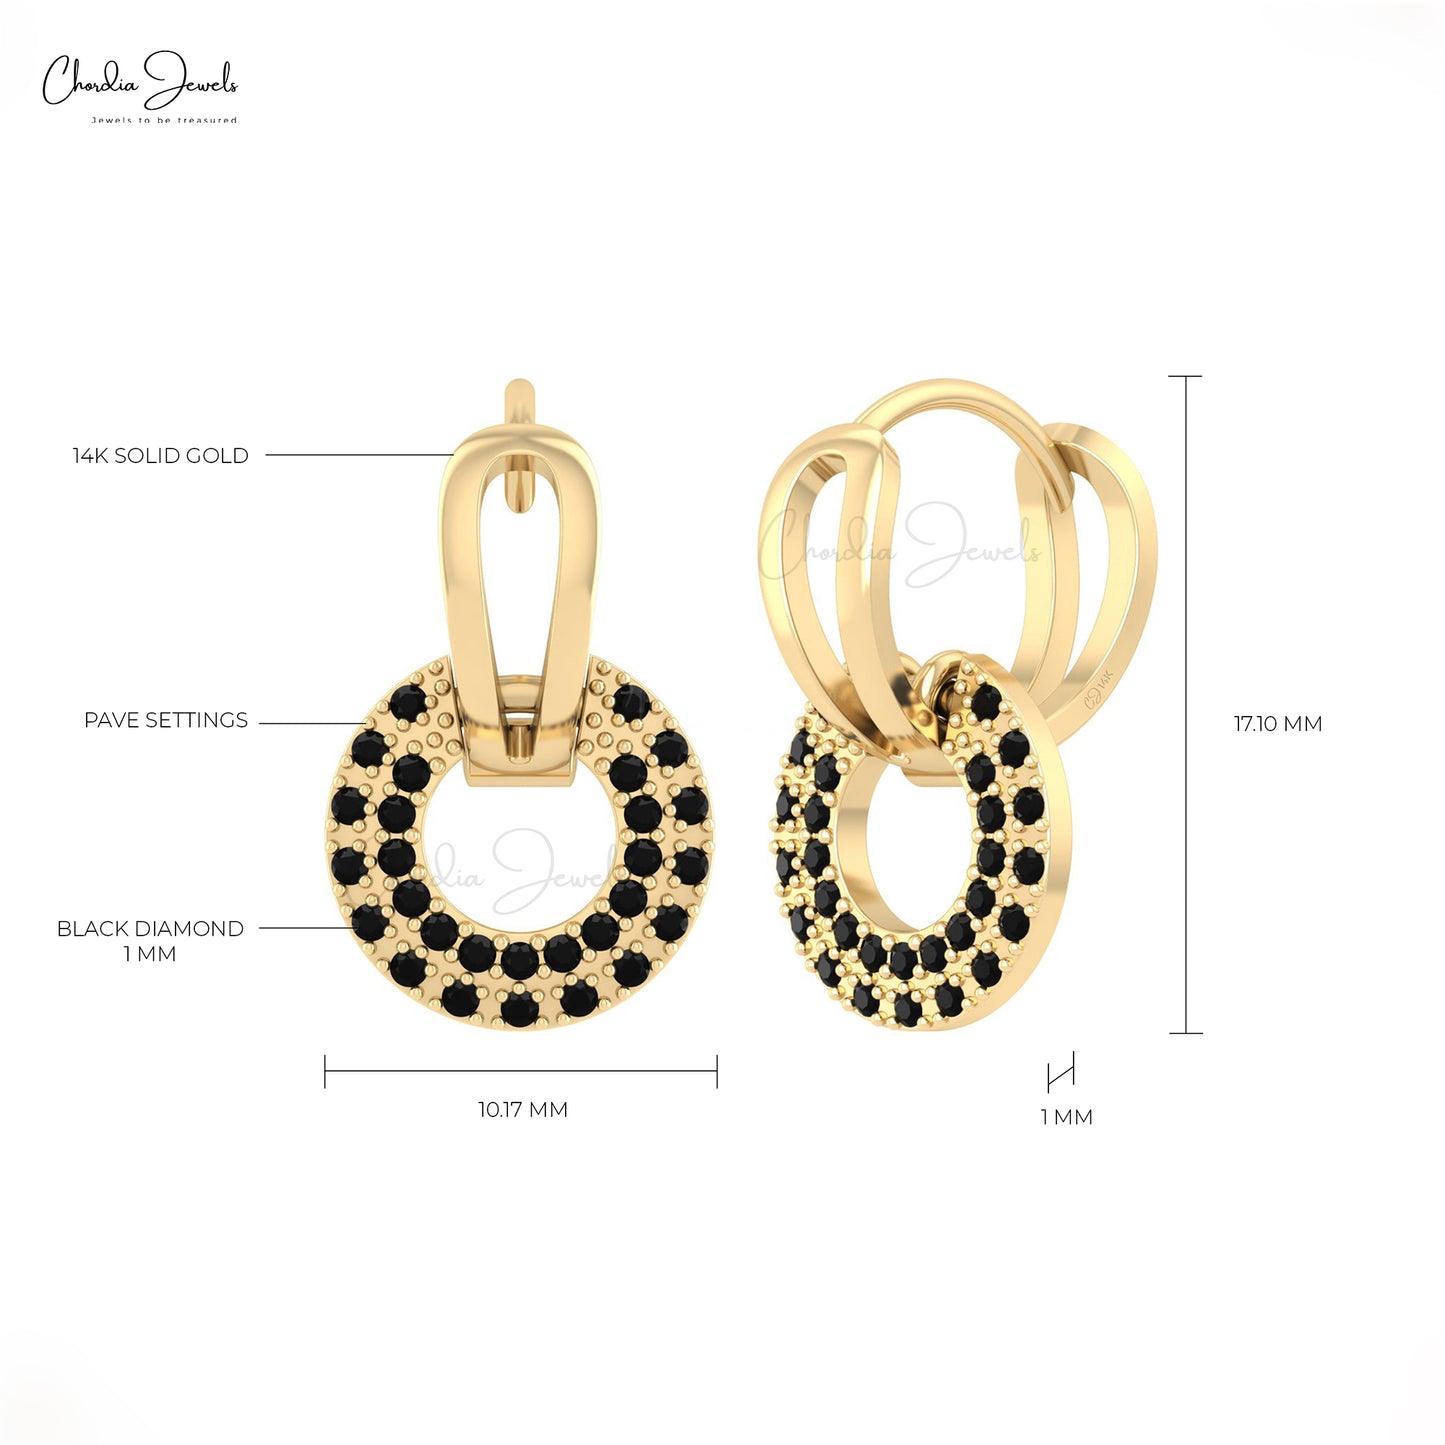 Load image into Gallery viewer, Clip Earrings With Black Diamond Gemstone 14k Solid Gold Hinge Back Closure Earrings
